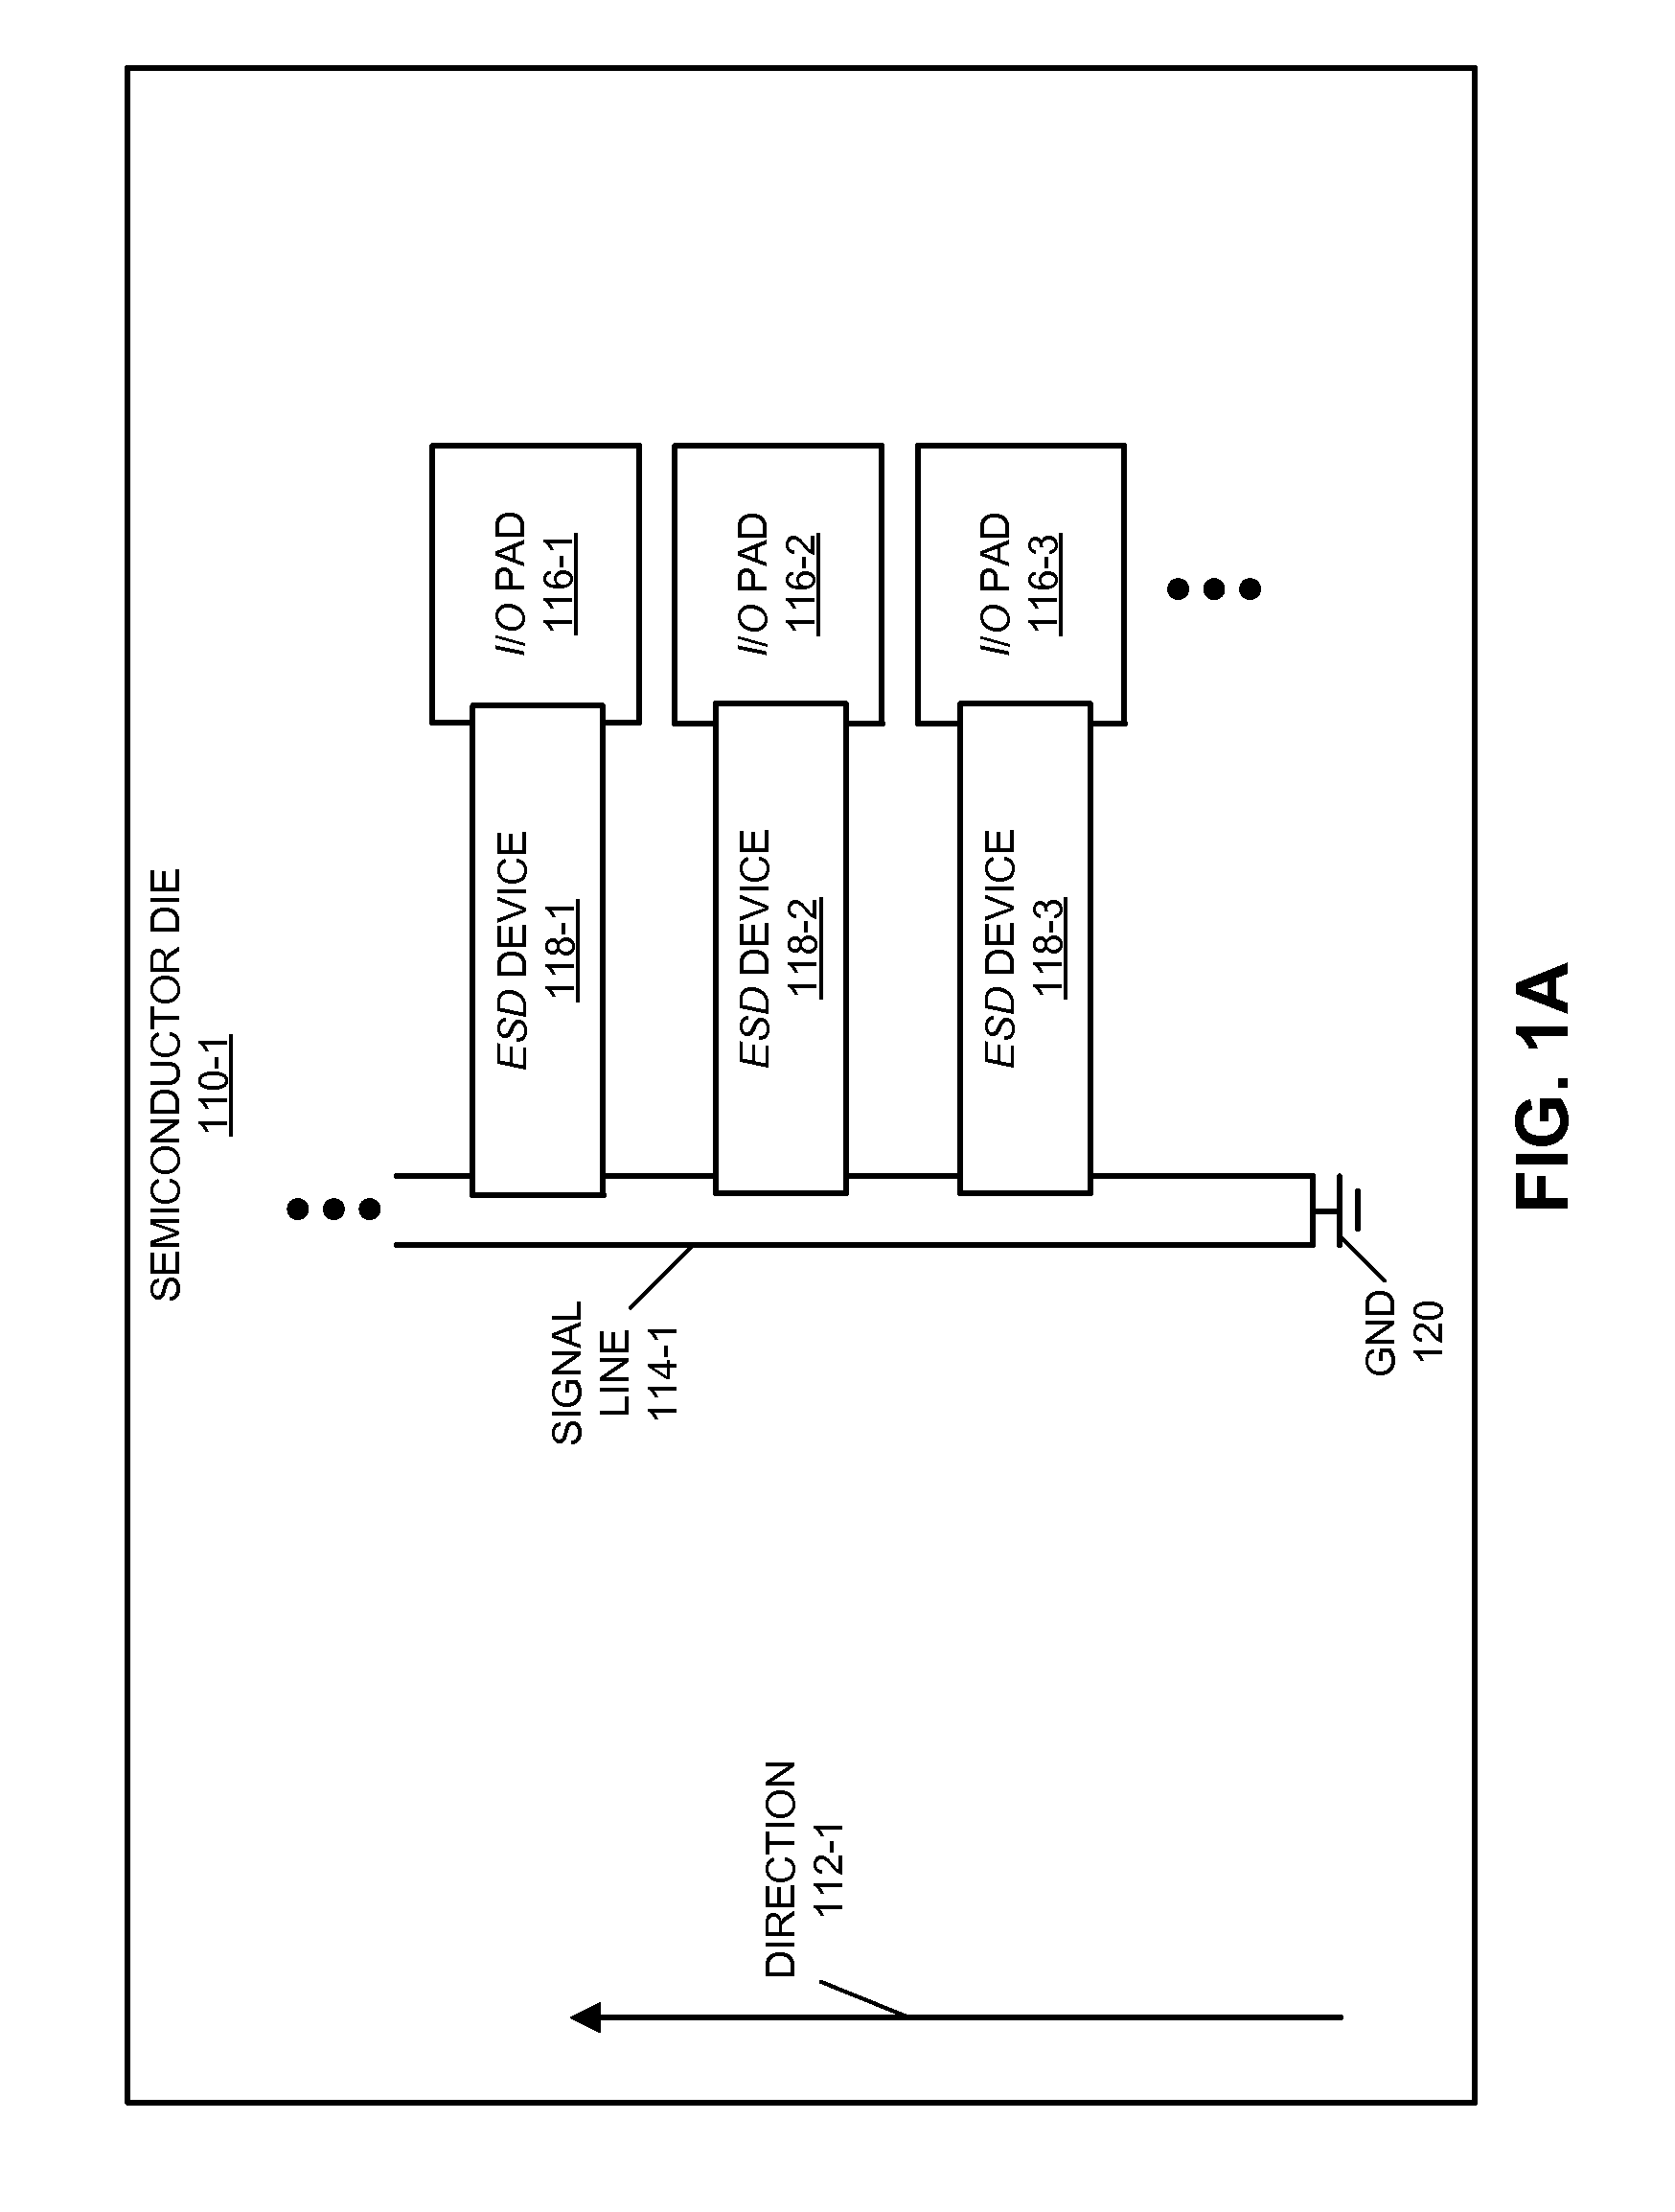 Semiconductor die with integrated electro-static discharge device